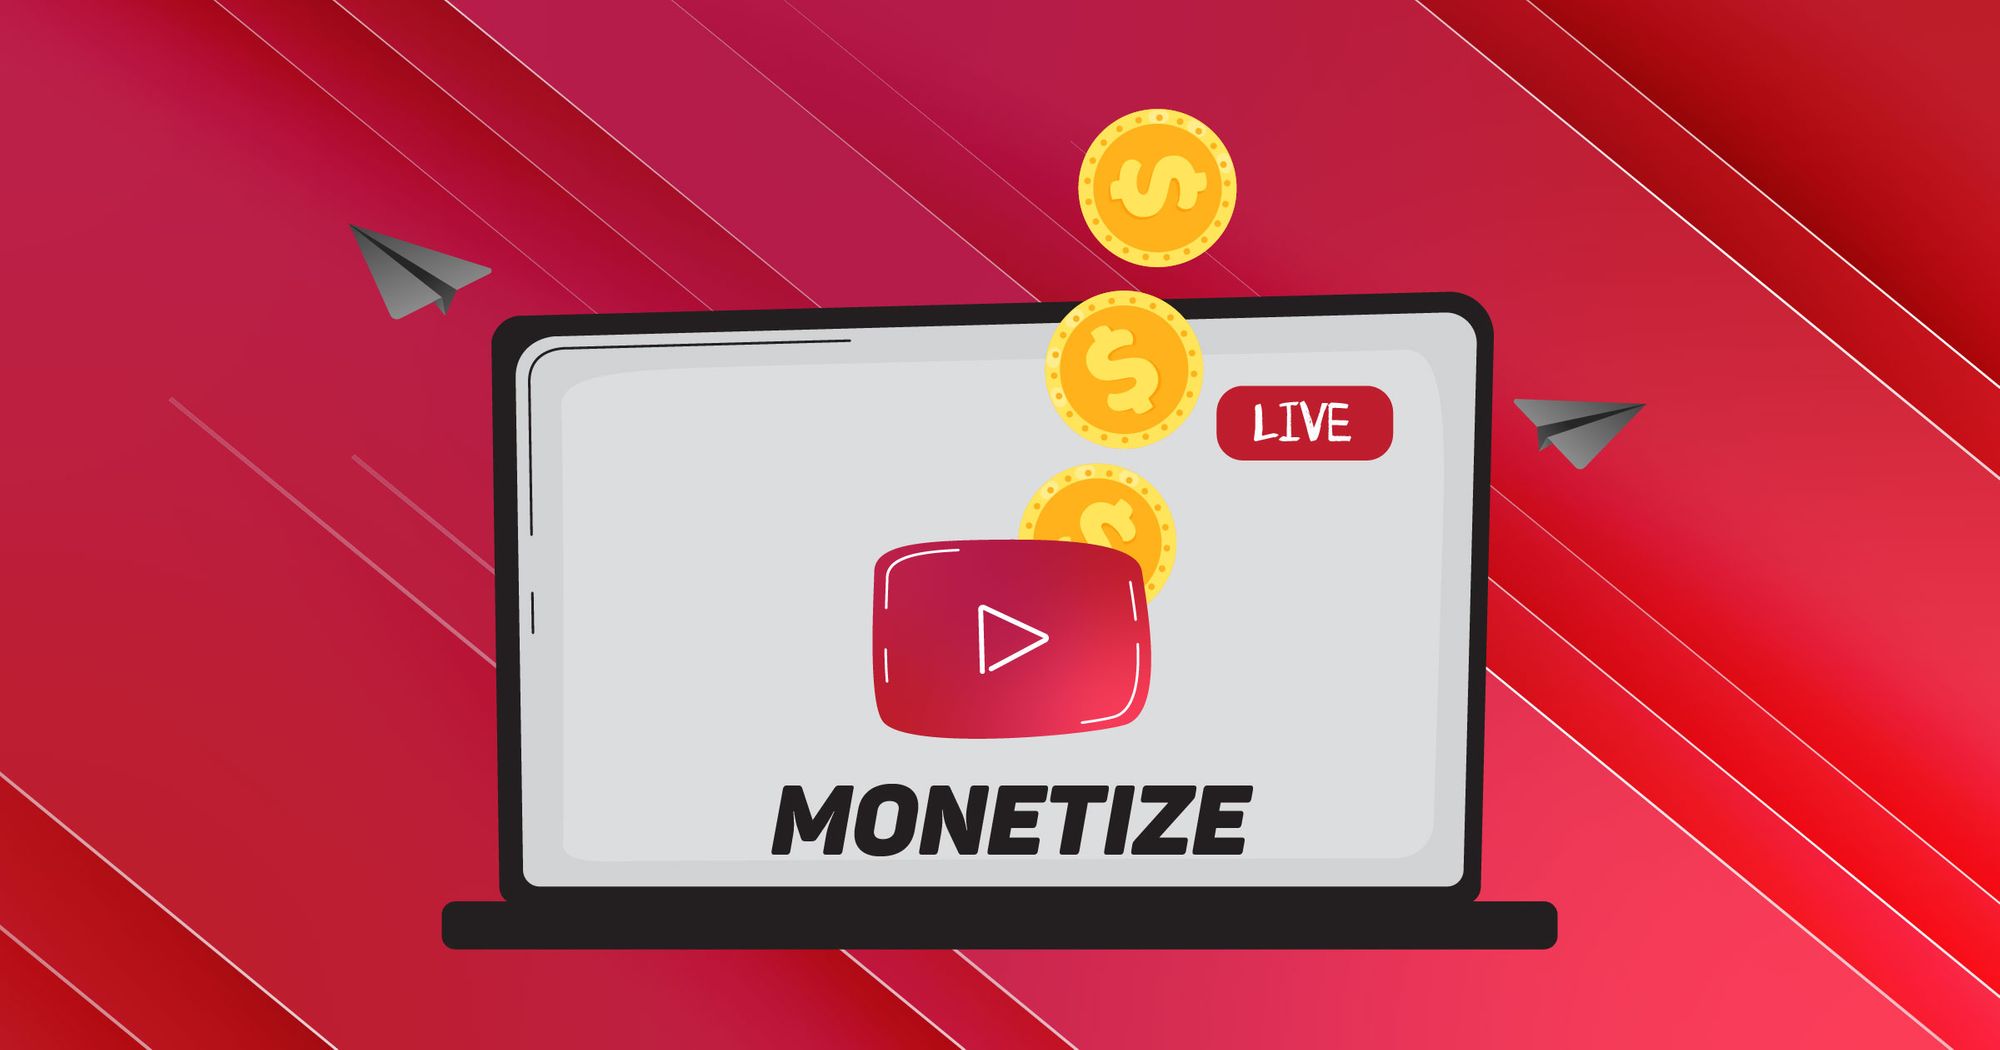 How to make money with live streaming in 2022